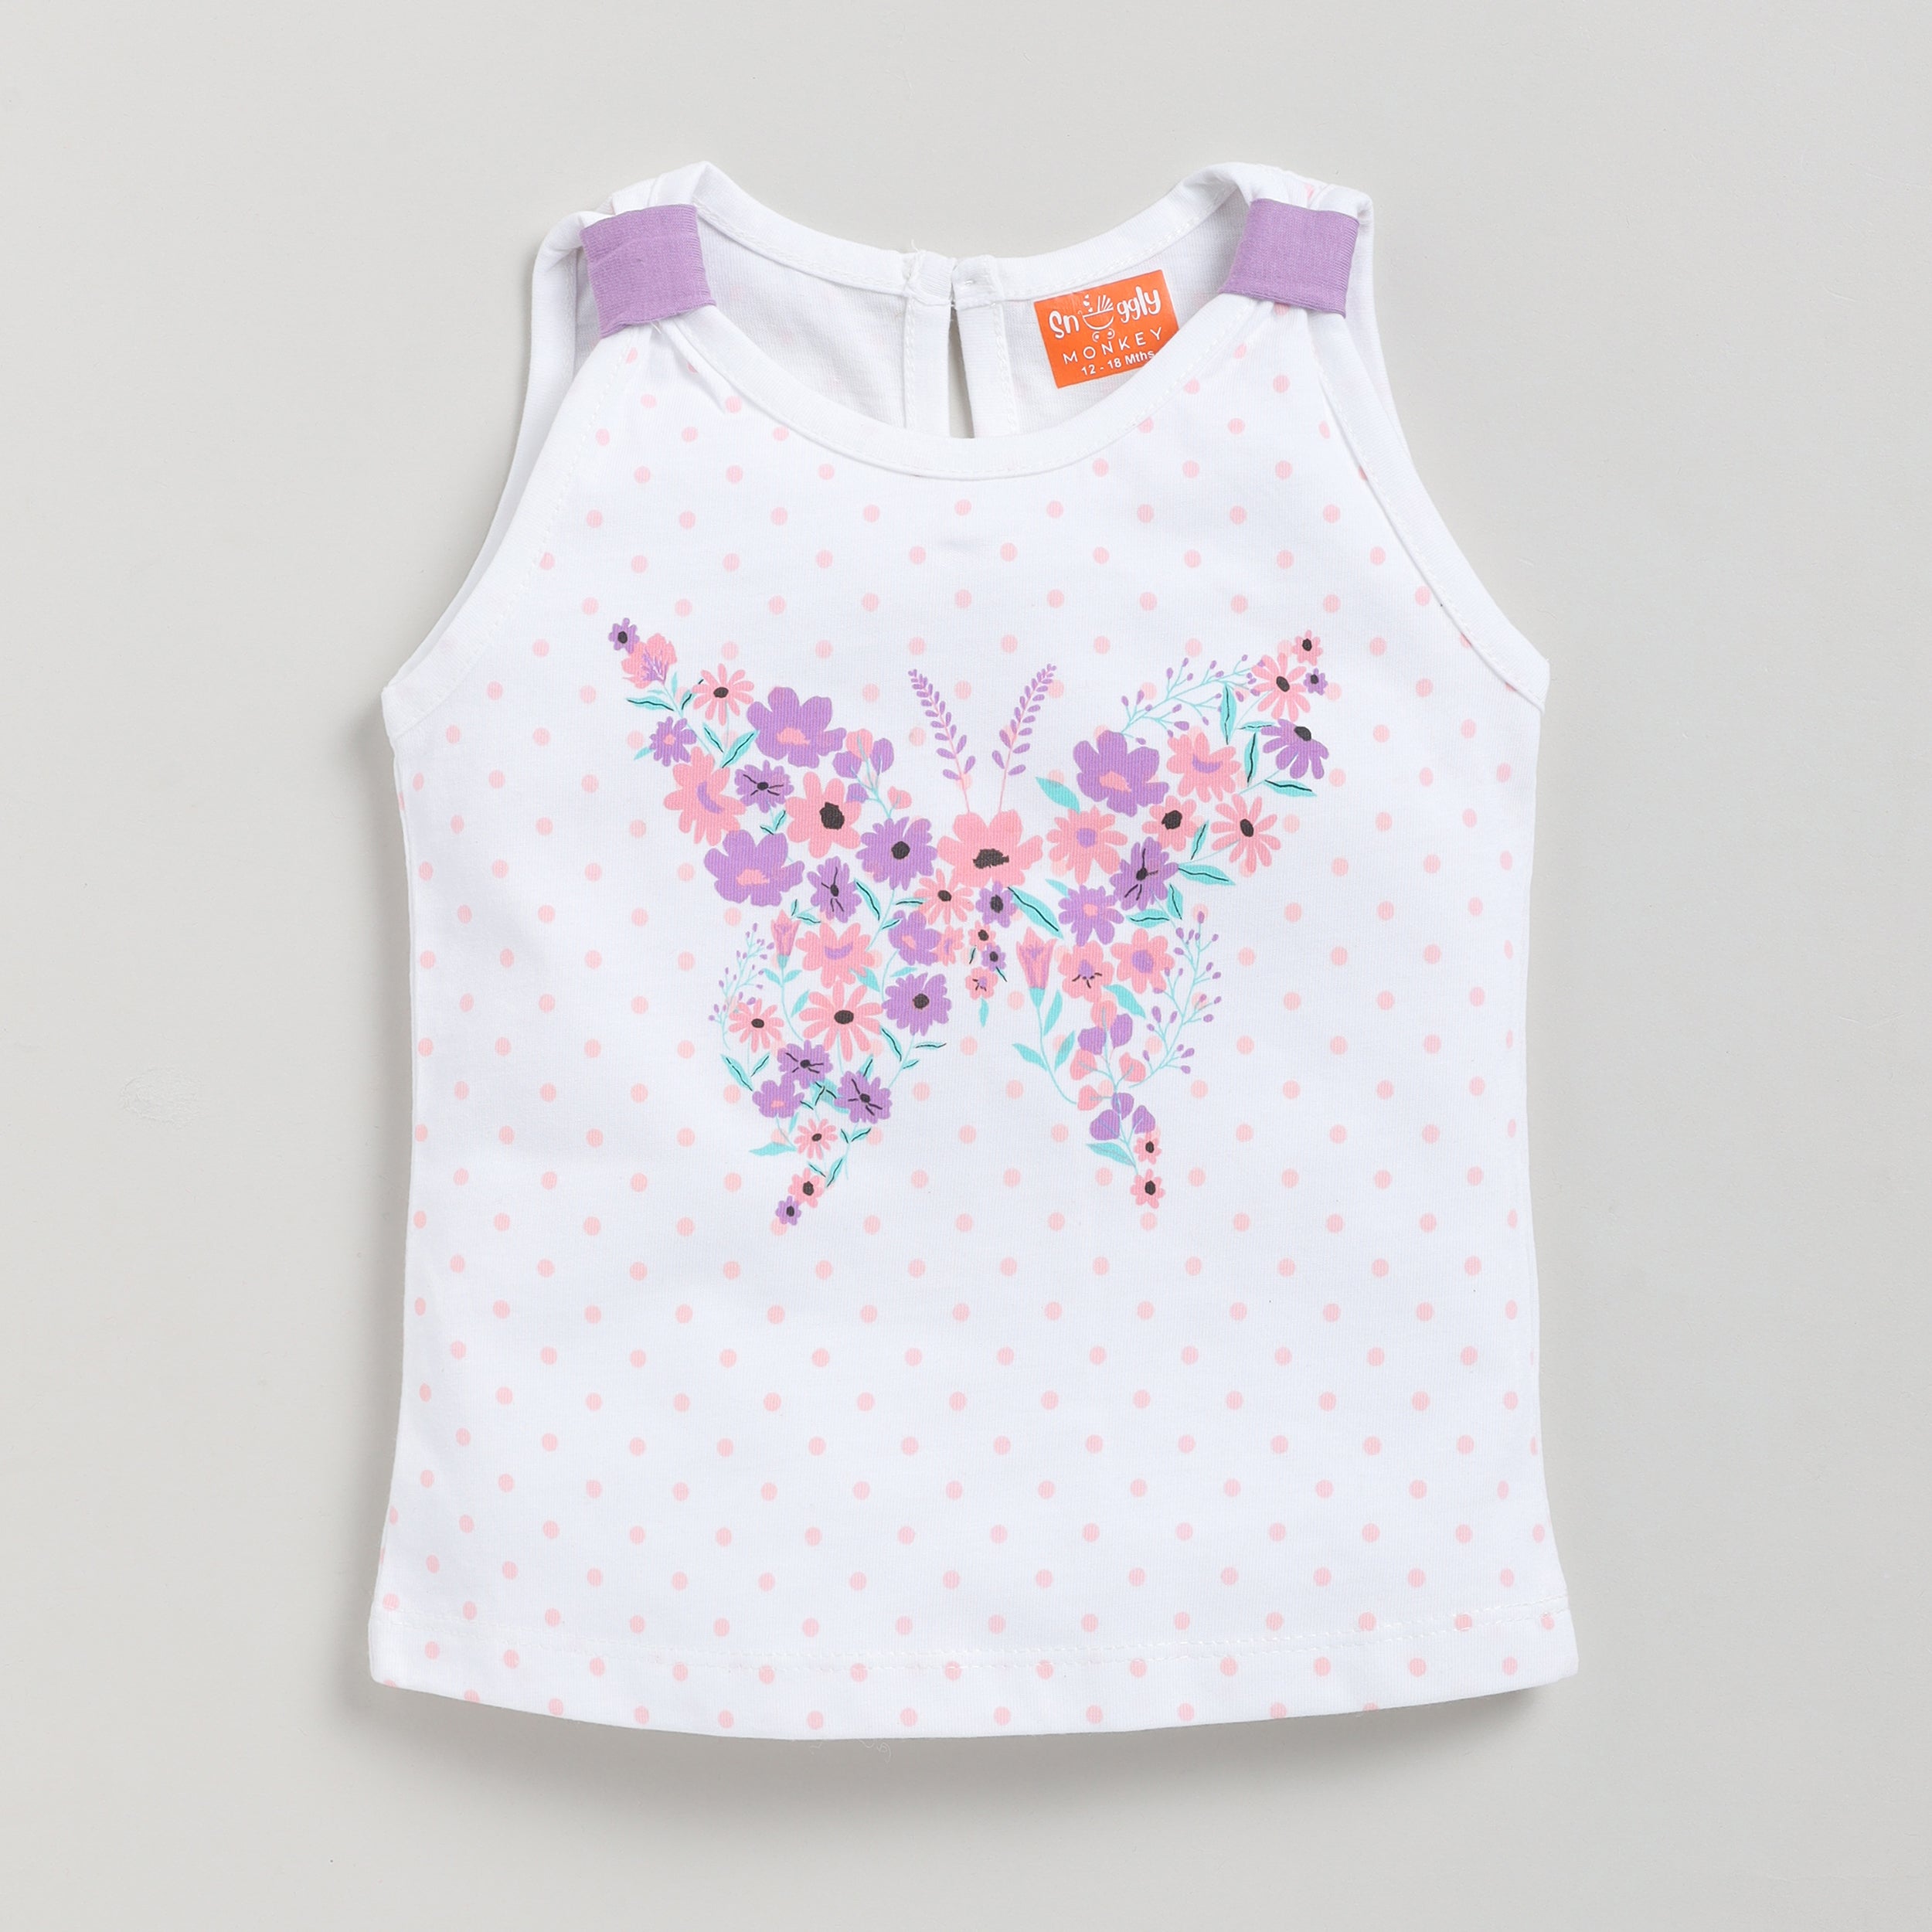 Snuggly Monkey Butterly Design Top with Skirt for Summer - Pink